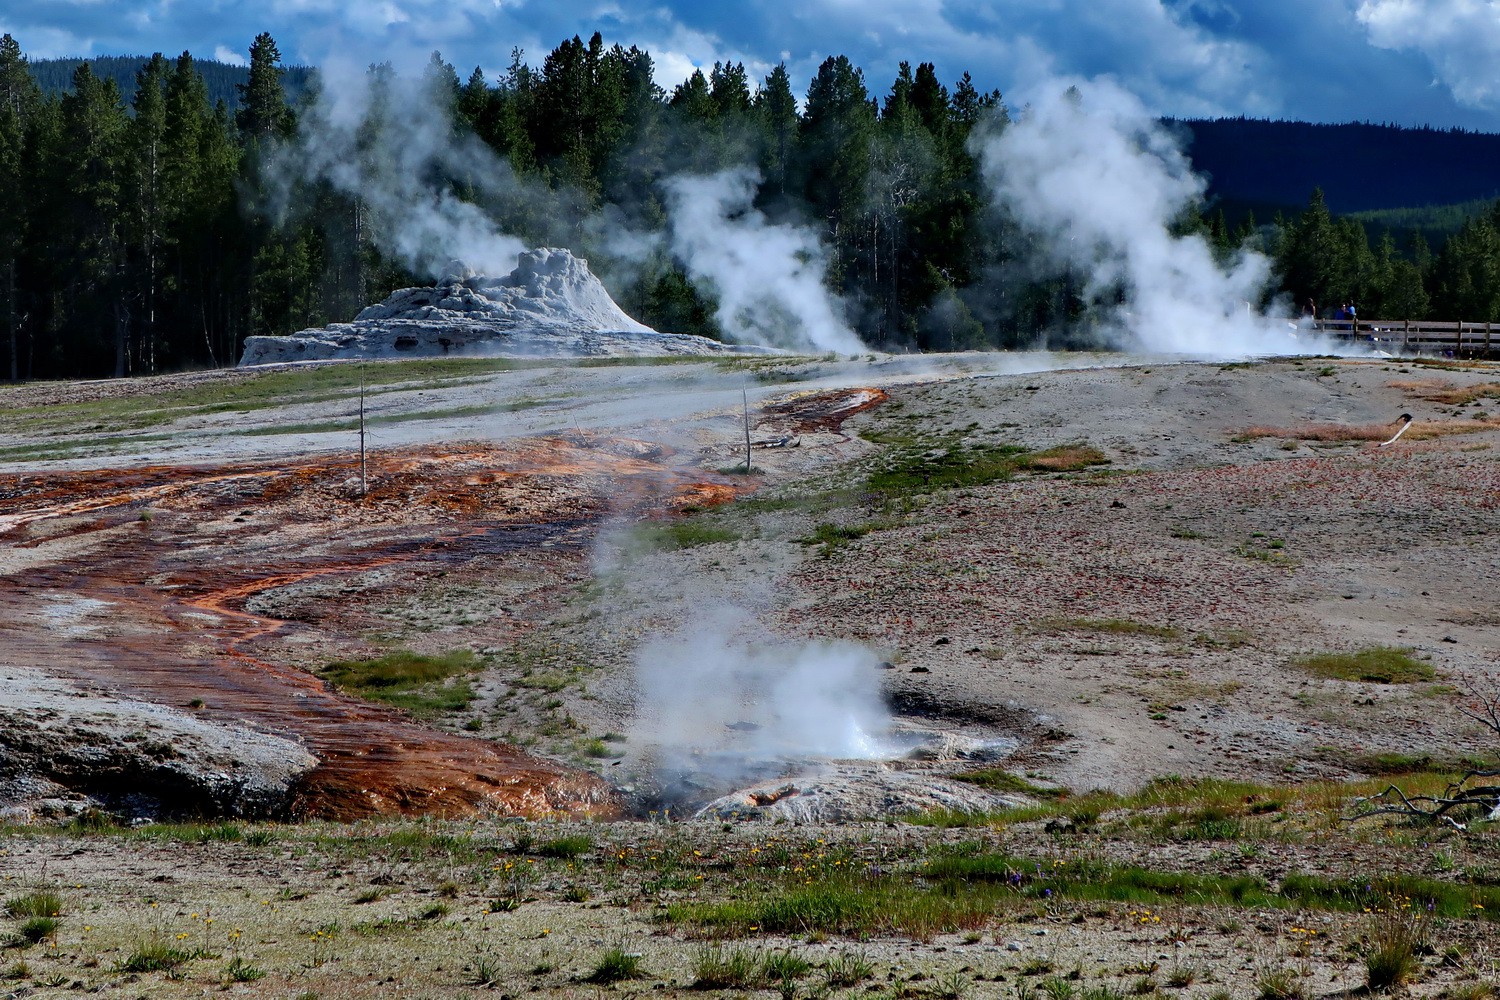 Another part of Upper Geyser Basin